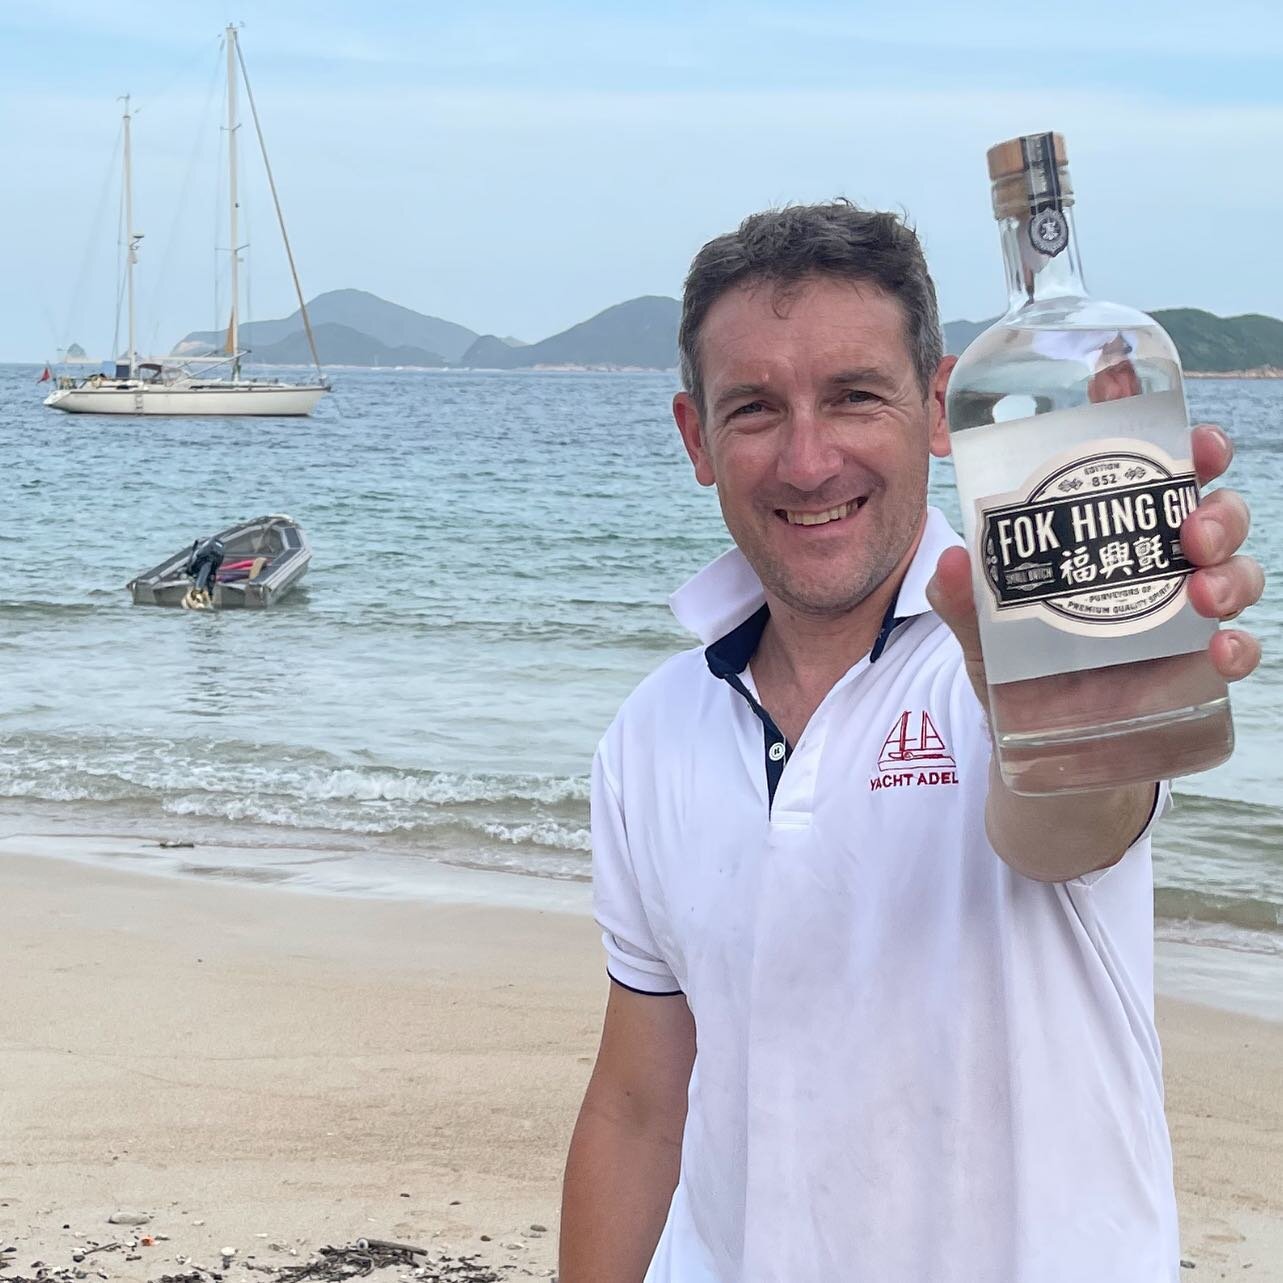 The best named Gin in the world? #rule62 #gin #sailinglife